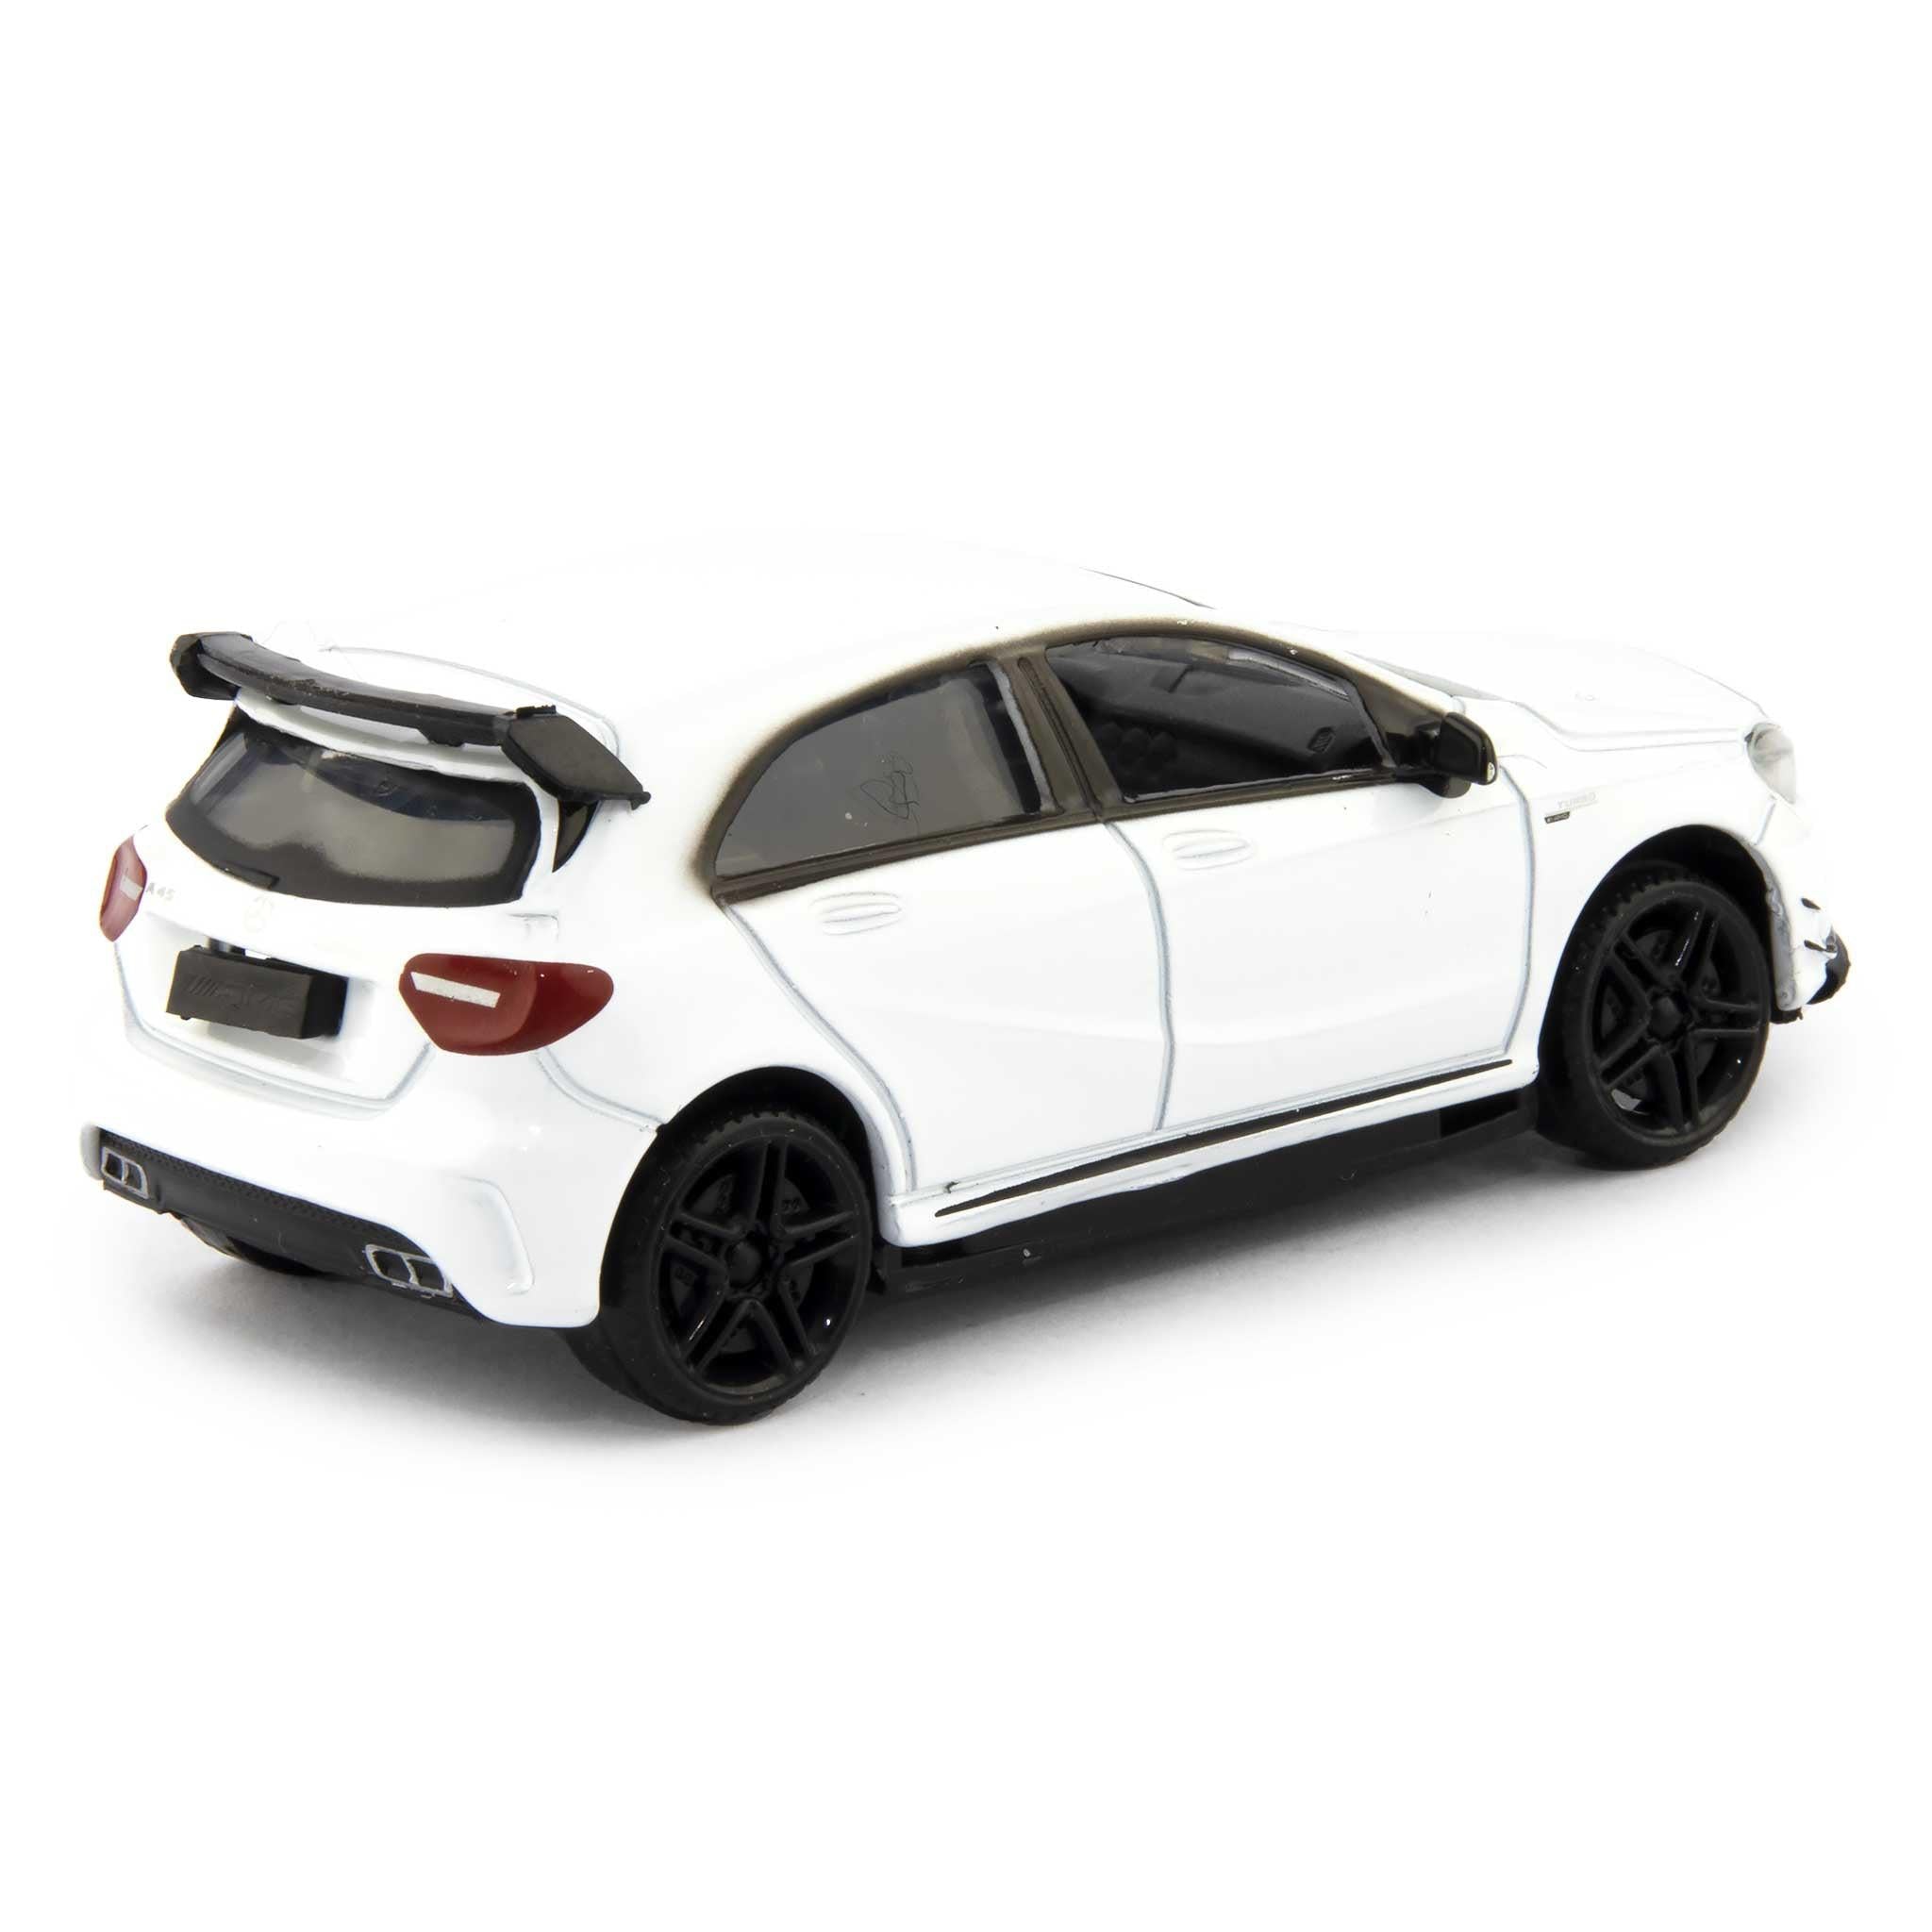 Mercedes-Benz AMG A45 Diecast Toy Car white - 1:43 Scale